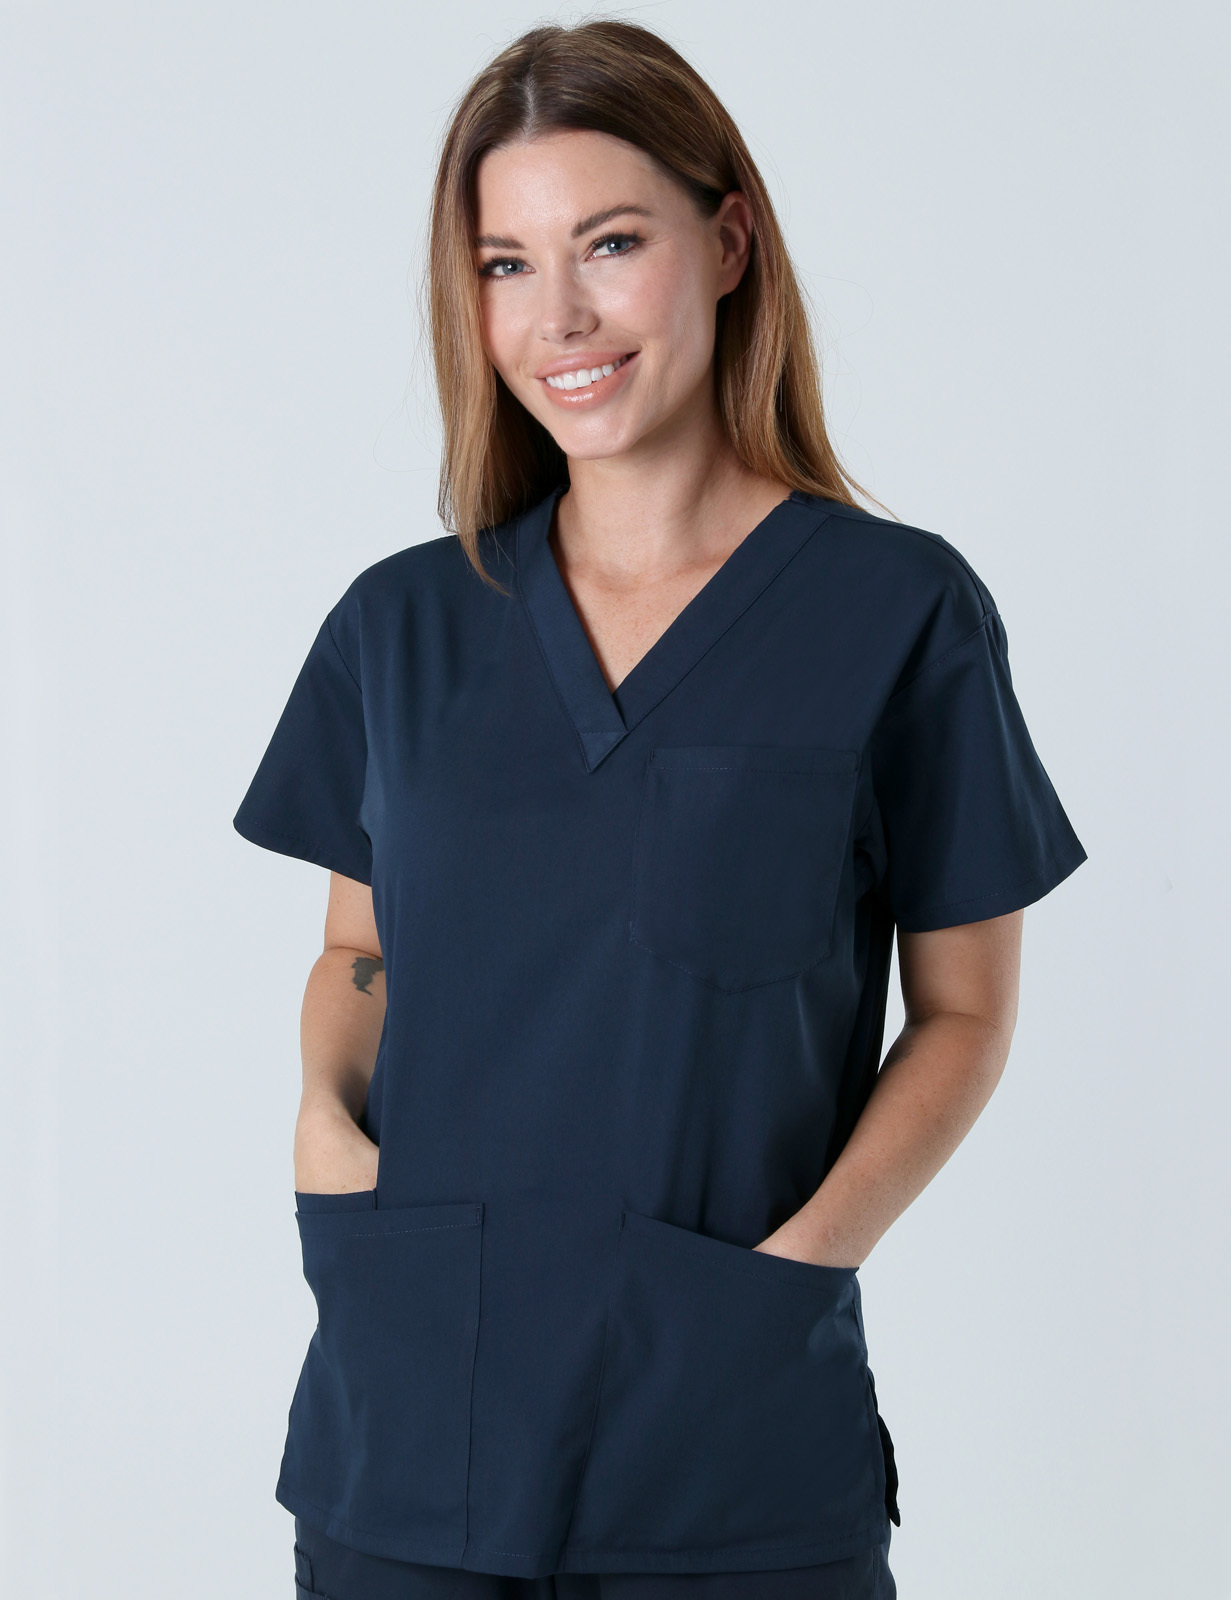 RBWH - Grantley Stable Neonatal Unit (4 Pocket Scrub Top and Cargo Pants in Navy incl Logos)